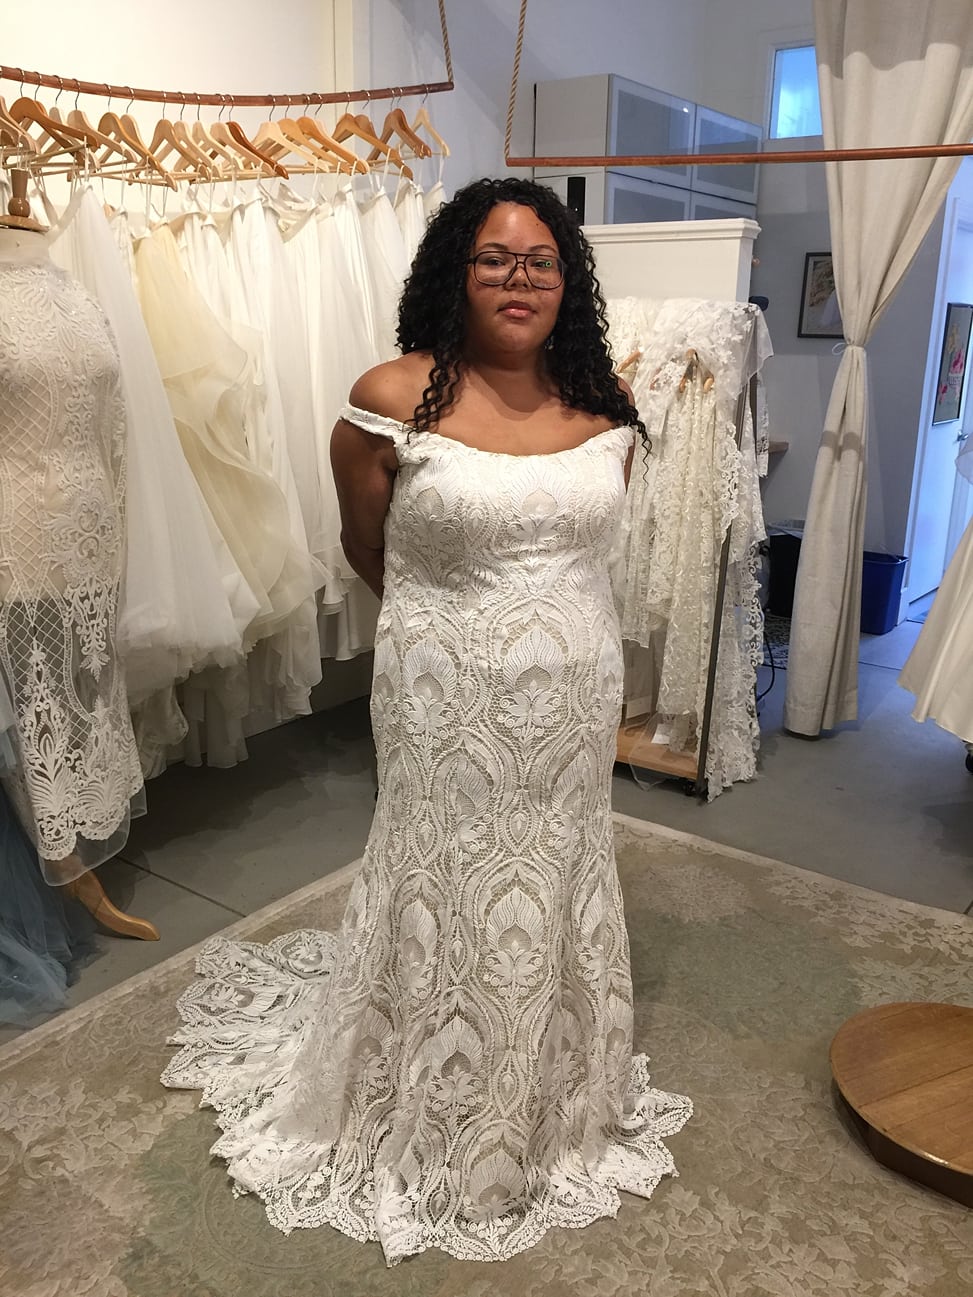 woman wearing glasses with long curly black hair wear long off the shoulder lace wedding dress standing in front of other lace wedding dresses hanging on brown wooden hangers